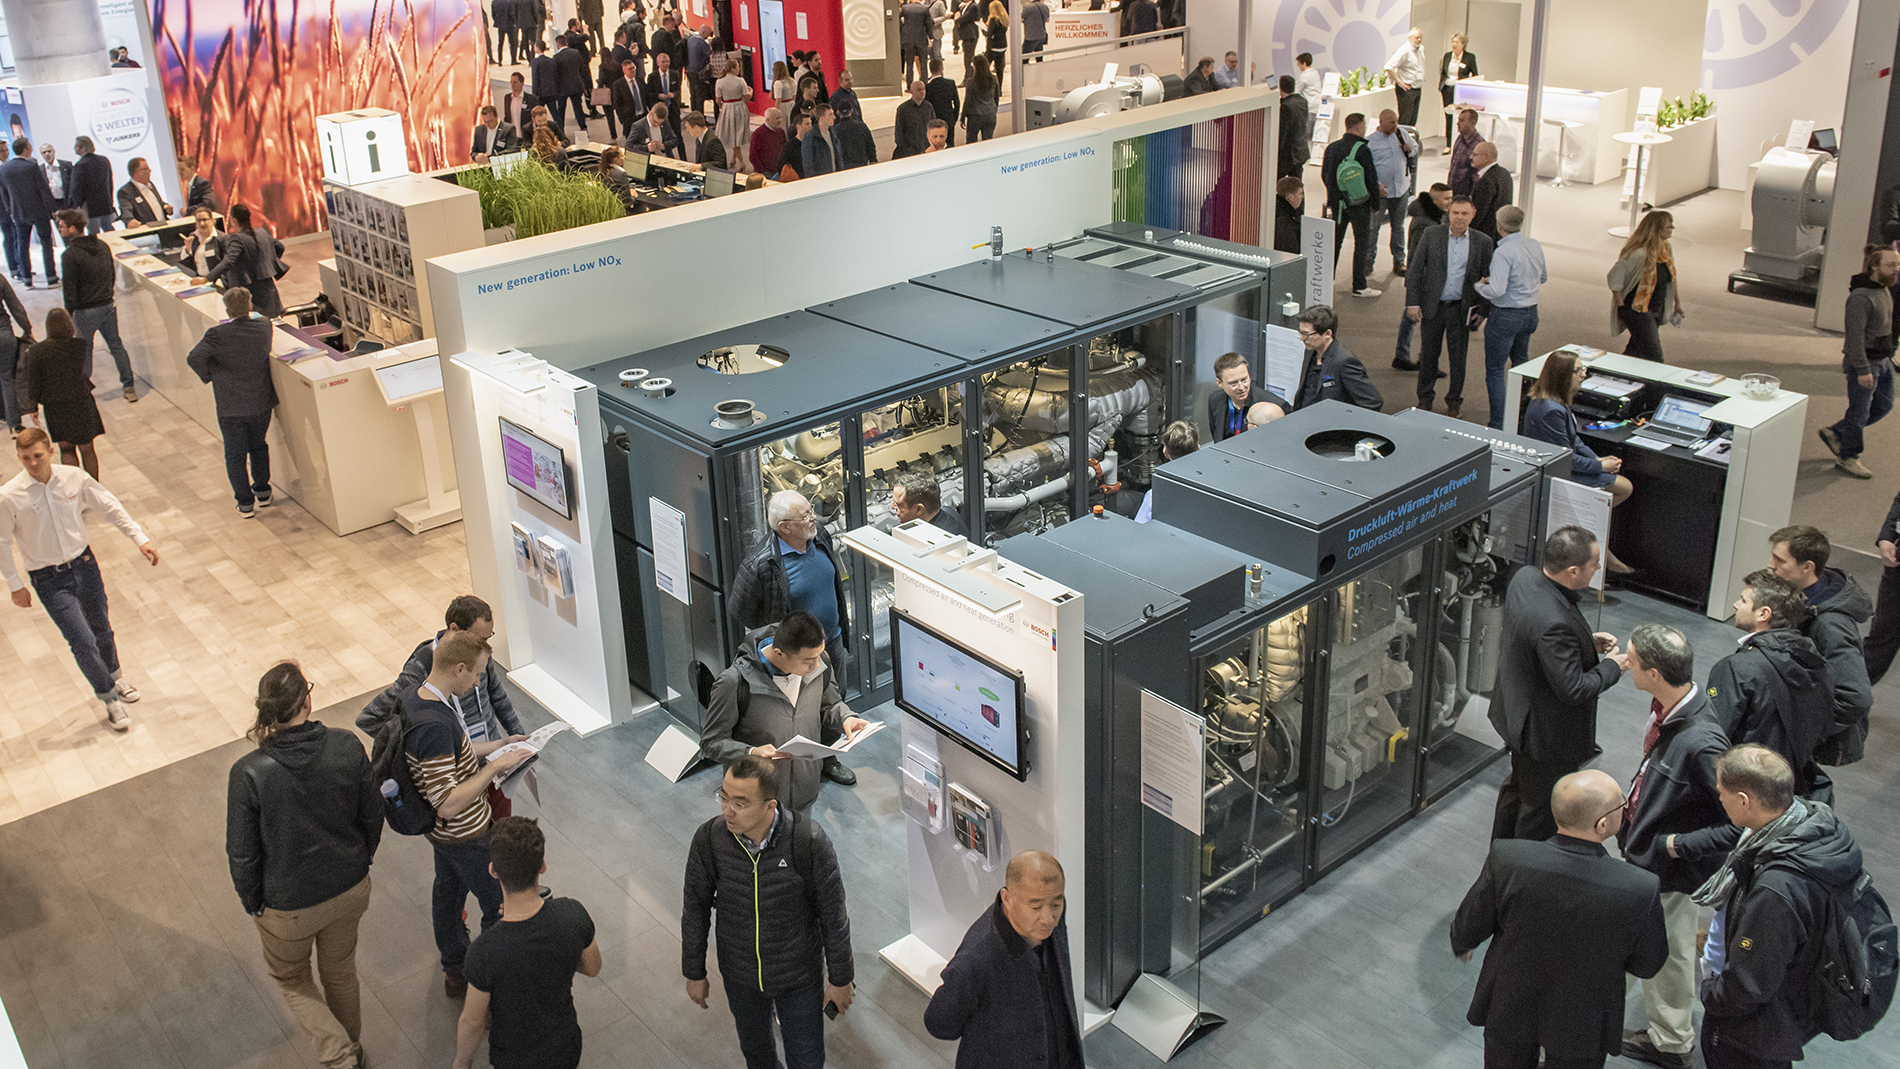 Leading companies present solutions for the energy transition in buildings at ISH (Source: Messe Frankfurt)